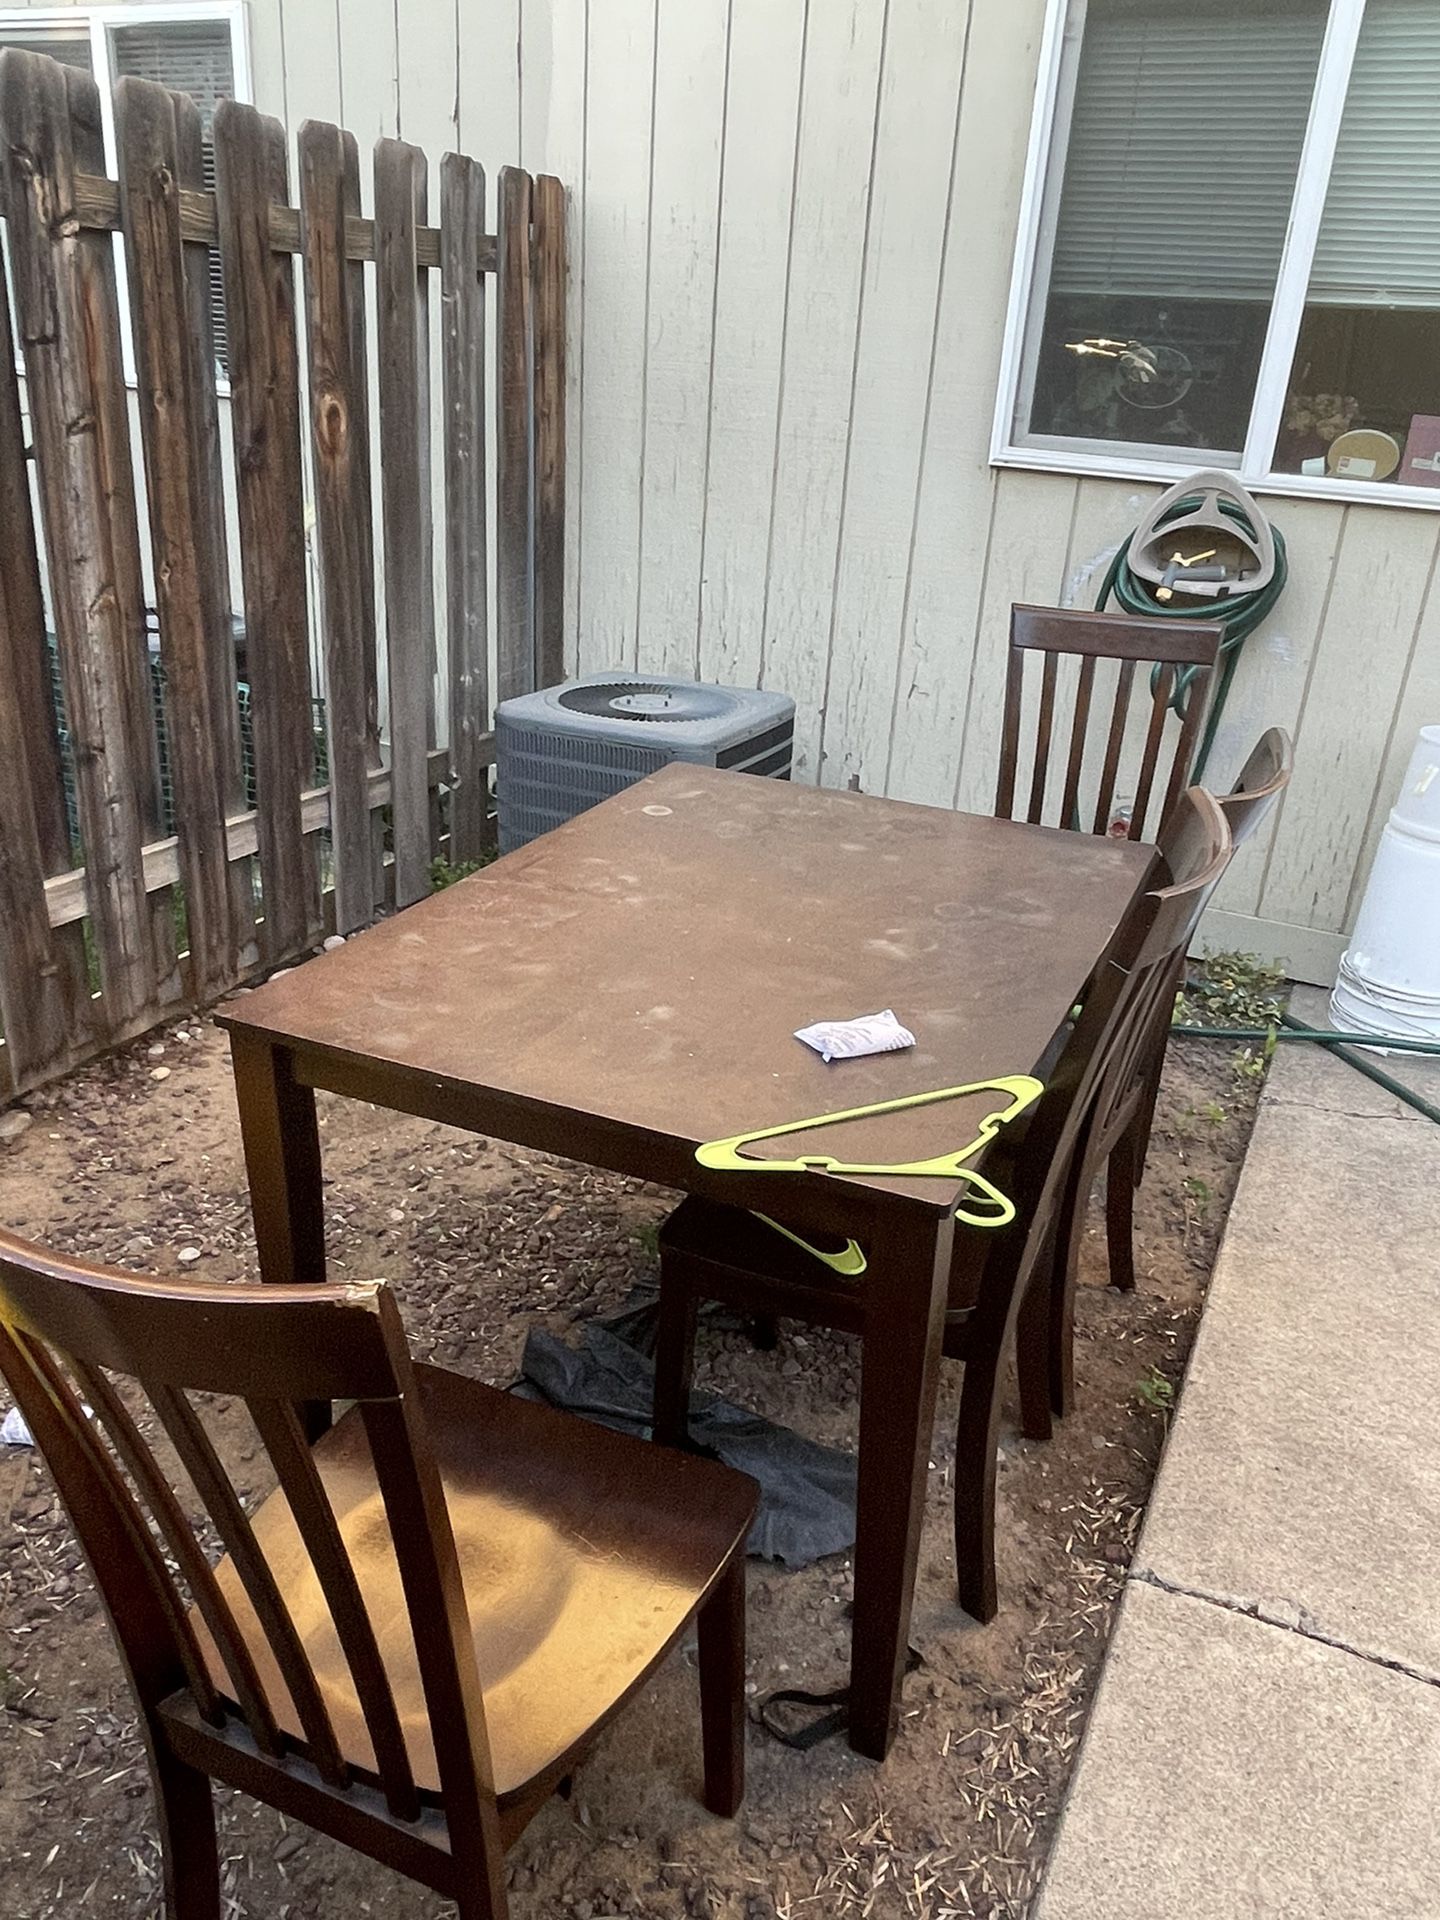 Table  Chairs $20 Dollars 